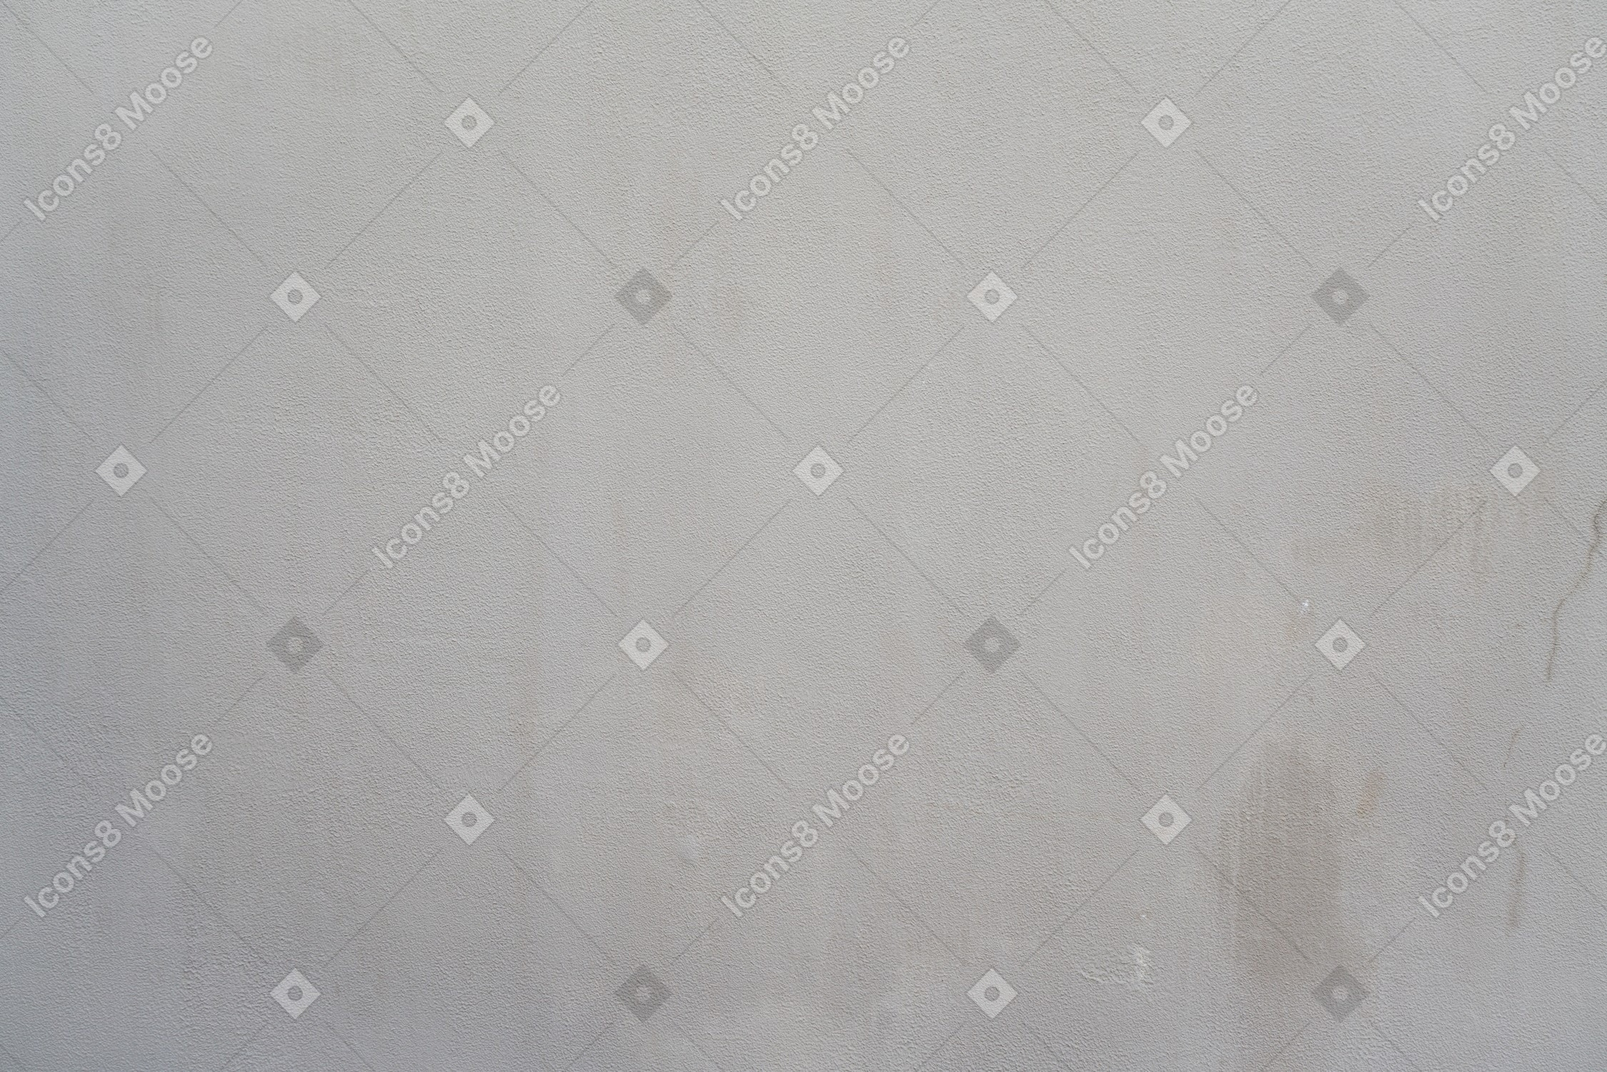 A light grey wall with a white border